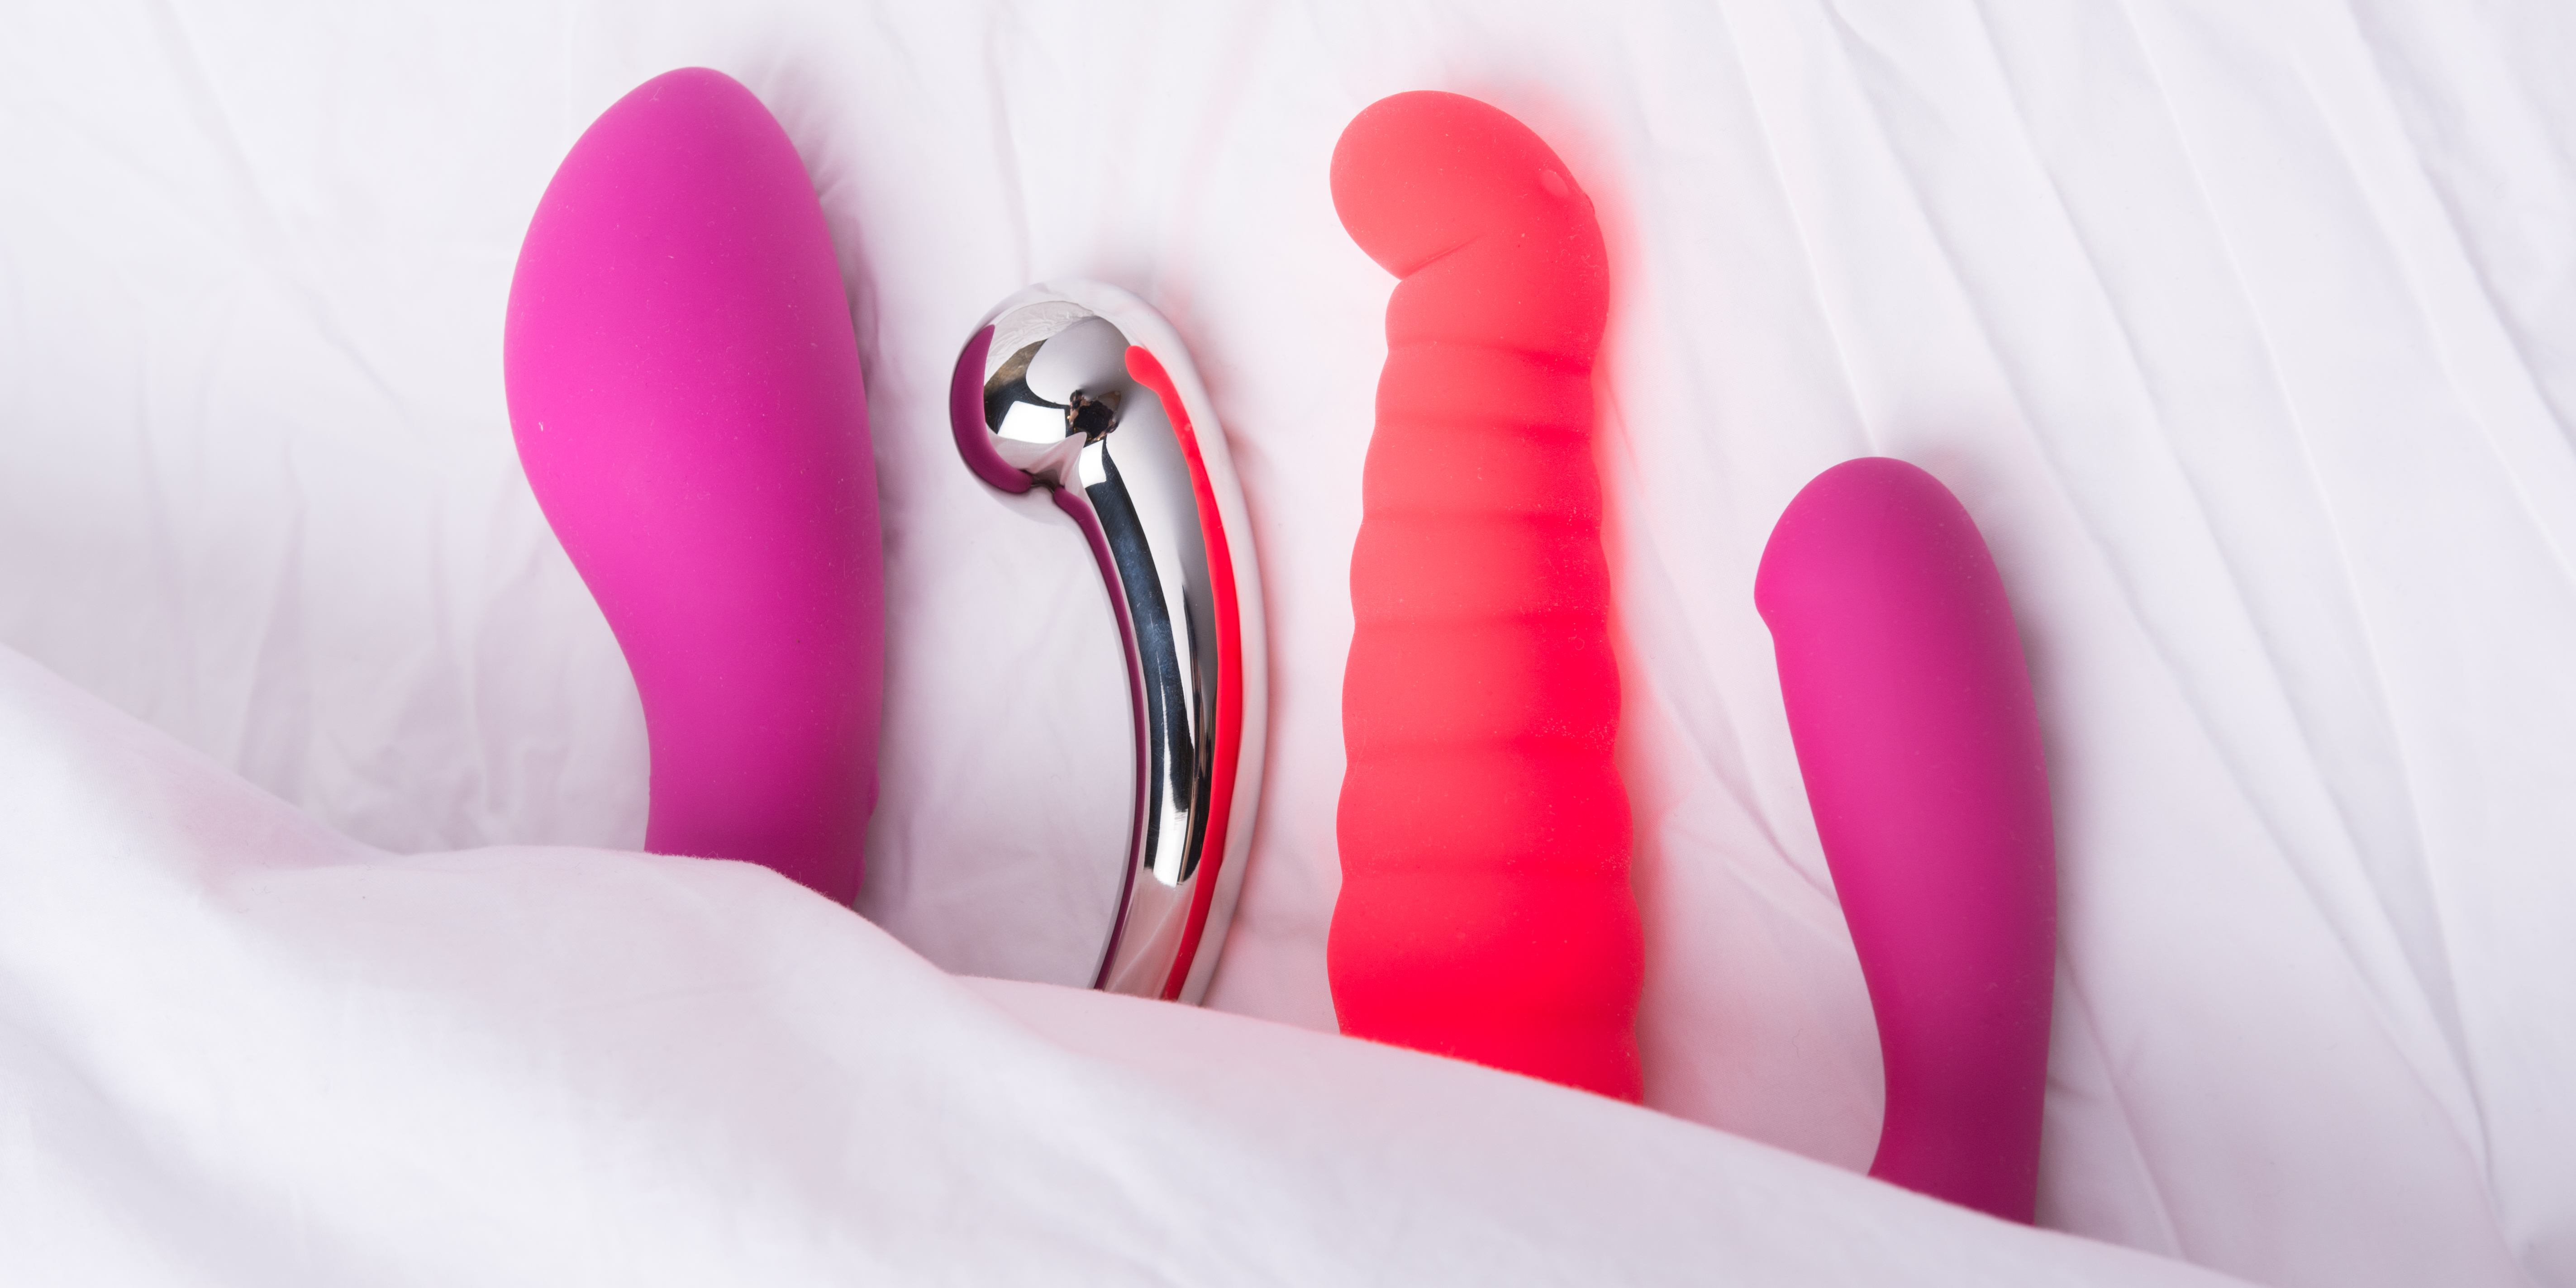 devery johnson recommends sex toys to make you squirt pic